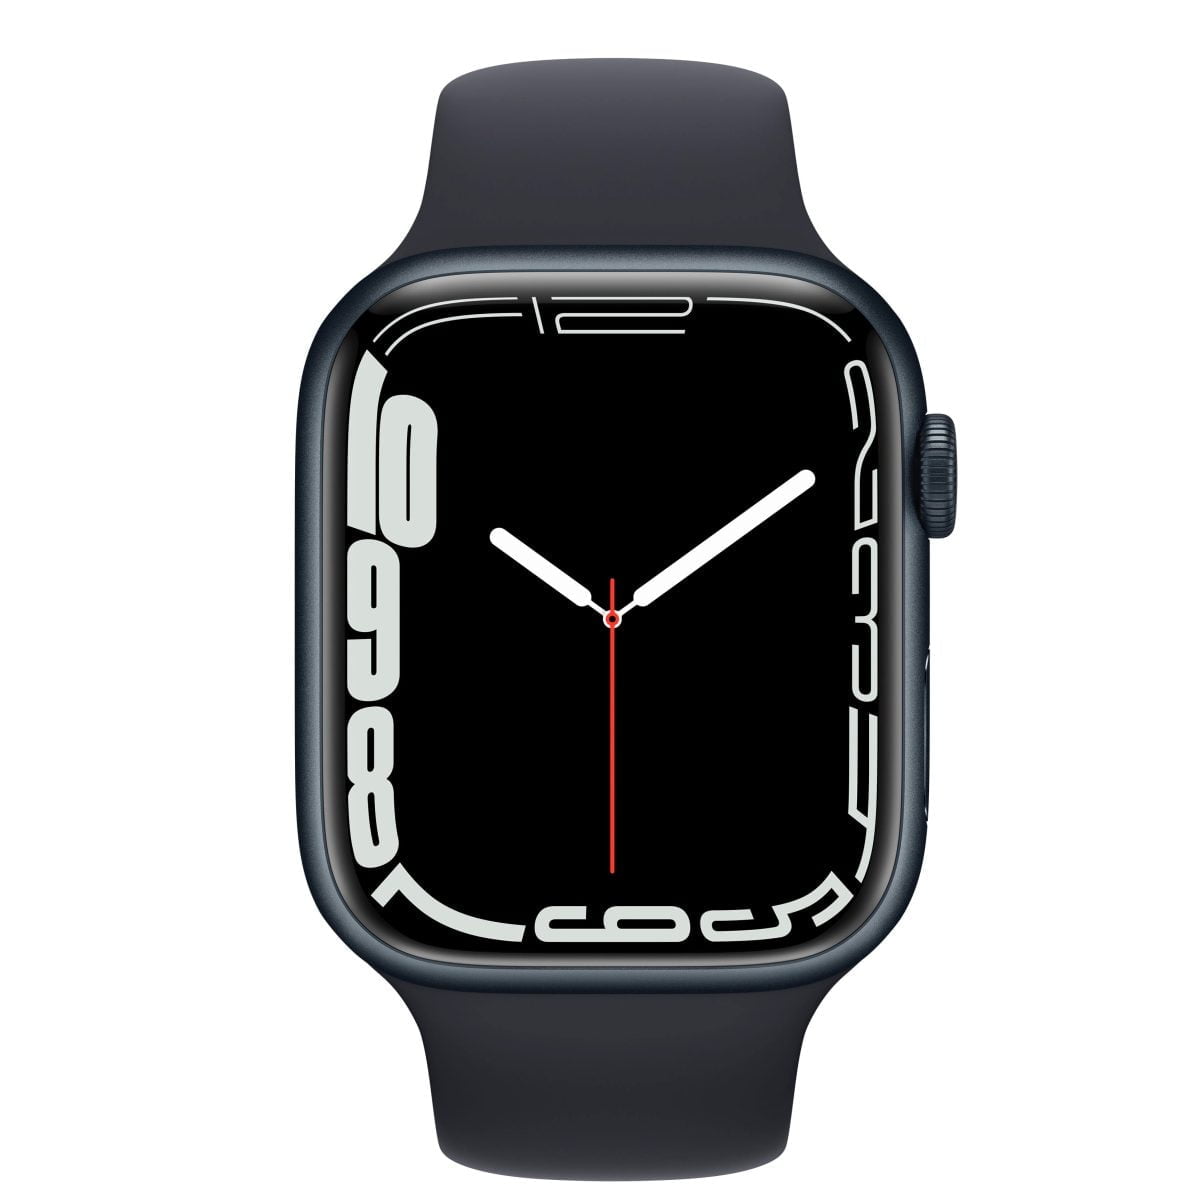 6215938Cv11D Scaled Apple &Lt;H1 Class=&Quot;Heading-5 V-Fw-Regular&Quot;&Gt;Apple Watch Series 7 (Gps) 45Mm Midnight Aluminum Case With Midnight Sport Band - Midnight&Lt;/H1&Gt; &Lt;H2&Gt;Model : Mkn53&Lt;/H2&Gt; Https://Www.youtube.com/Watch?V=Mmdq-Gwbnze &Lt;Div Class=&Quot;Long-Description-Container Body-Copy &Quot;&Gt; &Lt;Div Class=&Quot;Html-Fragment&Quot;&Gt; &Lt;Div&Gt; &Lt;Div&Gt;The Largest, Most Advanced Always-On Retina Display Yet Makes Everything You Do With Your Apple Watch Series 7 Bigger And Better. Series 7 Is The Most Durable Apple Watch Ever Built, With An Even More Crack-Resistant Front Crystal. Advanced Features Let You Measure Your Blood Oxygen Level,¹ Take An Ecg Anytime, And Access Mindfulness And Sleep Tracking Apps. You Can Also Track Dozens Of Workouts, Including New Tai Chi And Pilates.&Lt;/Div&Gt; &Lt;/Div&Gt; &Lt;/Div&Gt; &Lt;/Div&Gt; Apple Watch Apple Watch Series 7 (Gps) 45Mm - Midnight